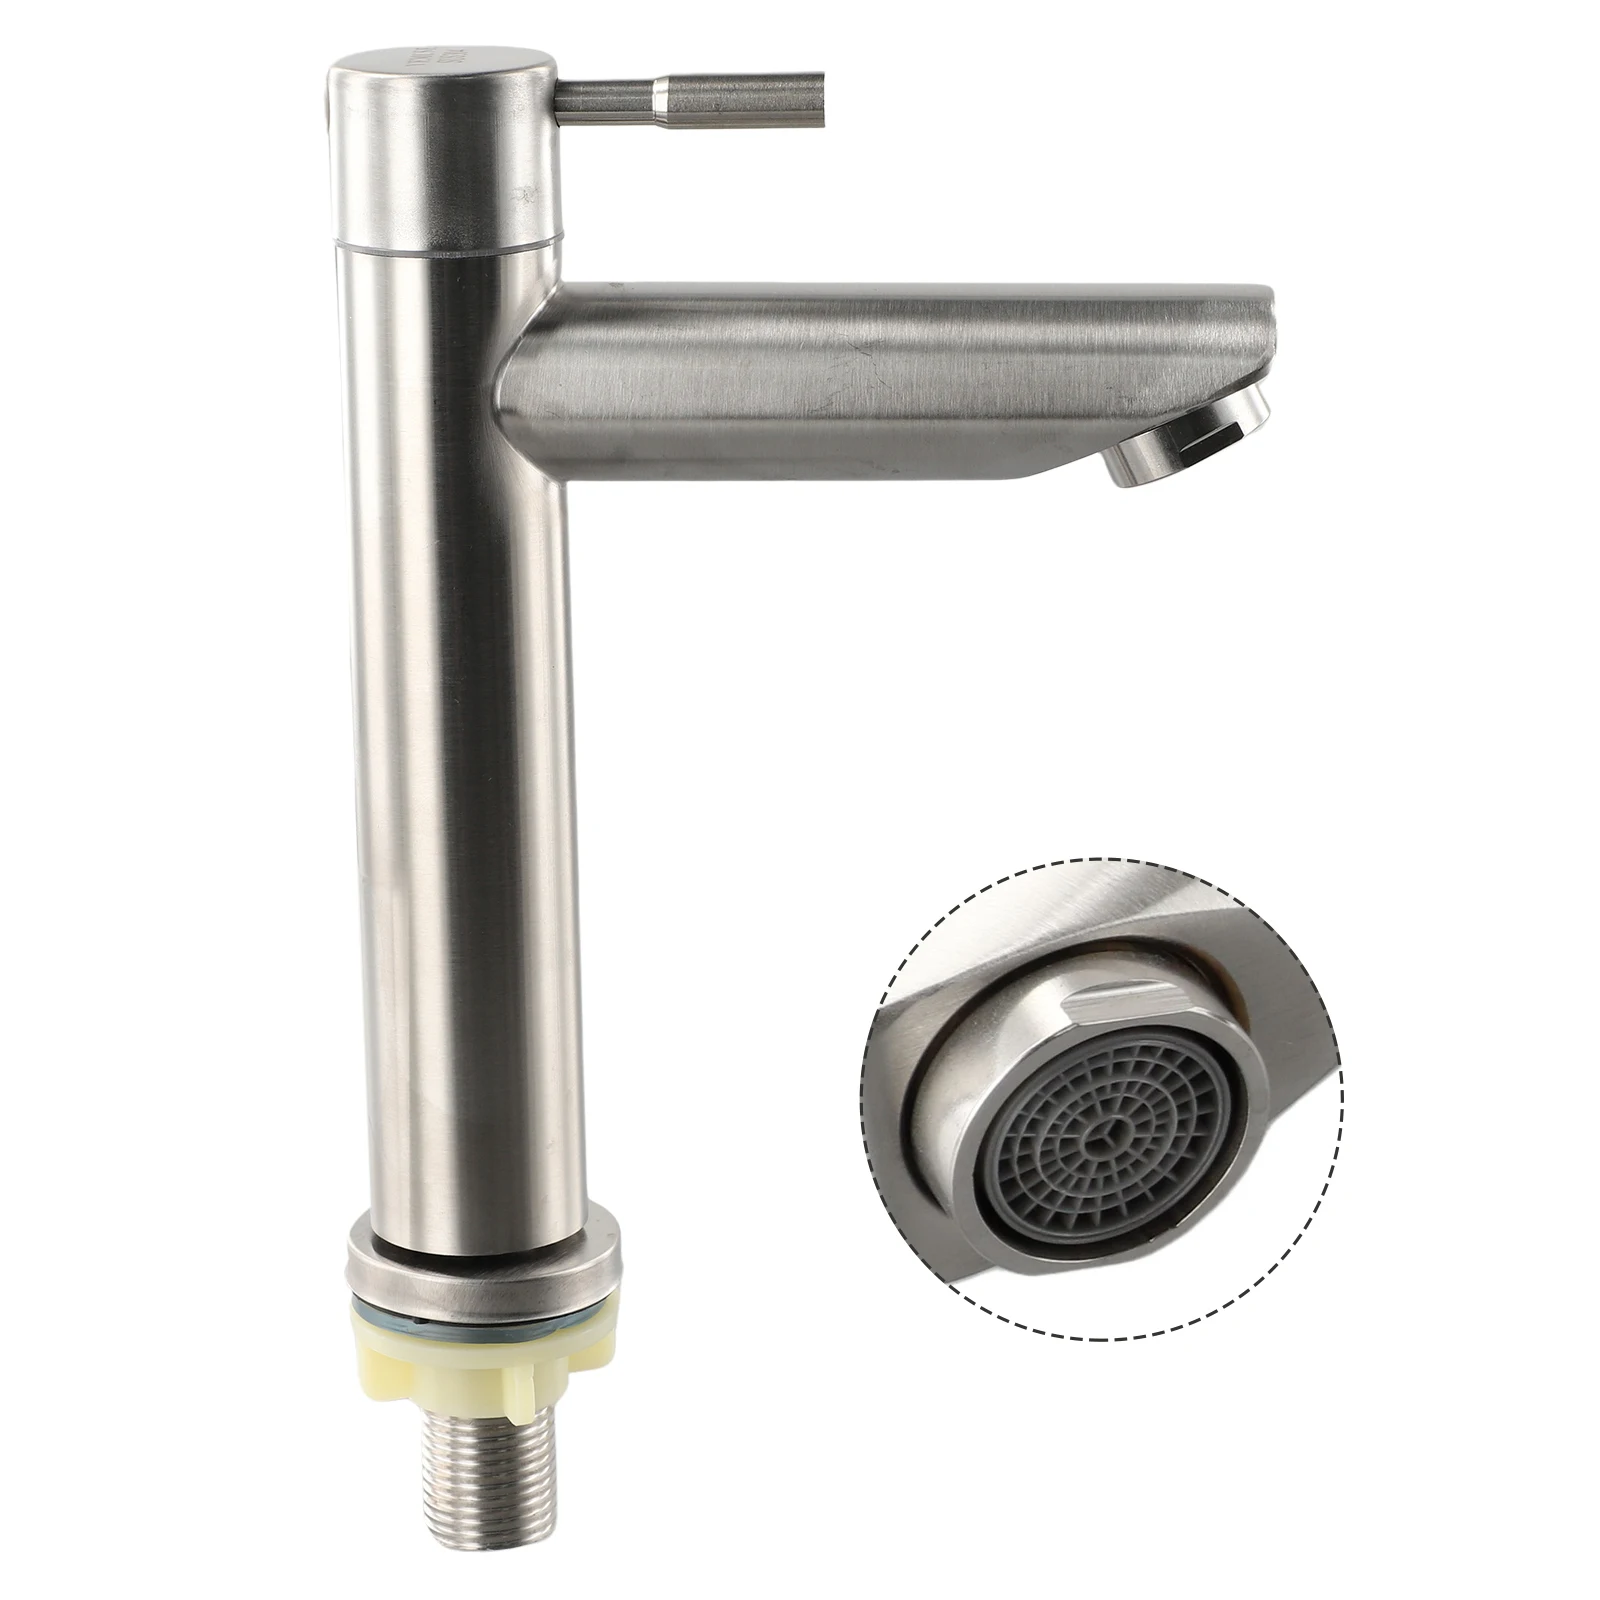 

Kitchen Sink Faucet 304 Stainless Steel Washbasin Faucets Single Cold Water Tap For Kitchen Bathroom Basin Water Taps